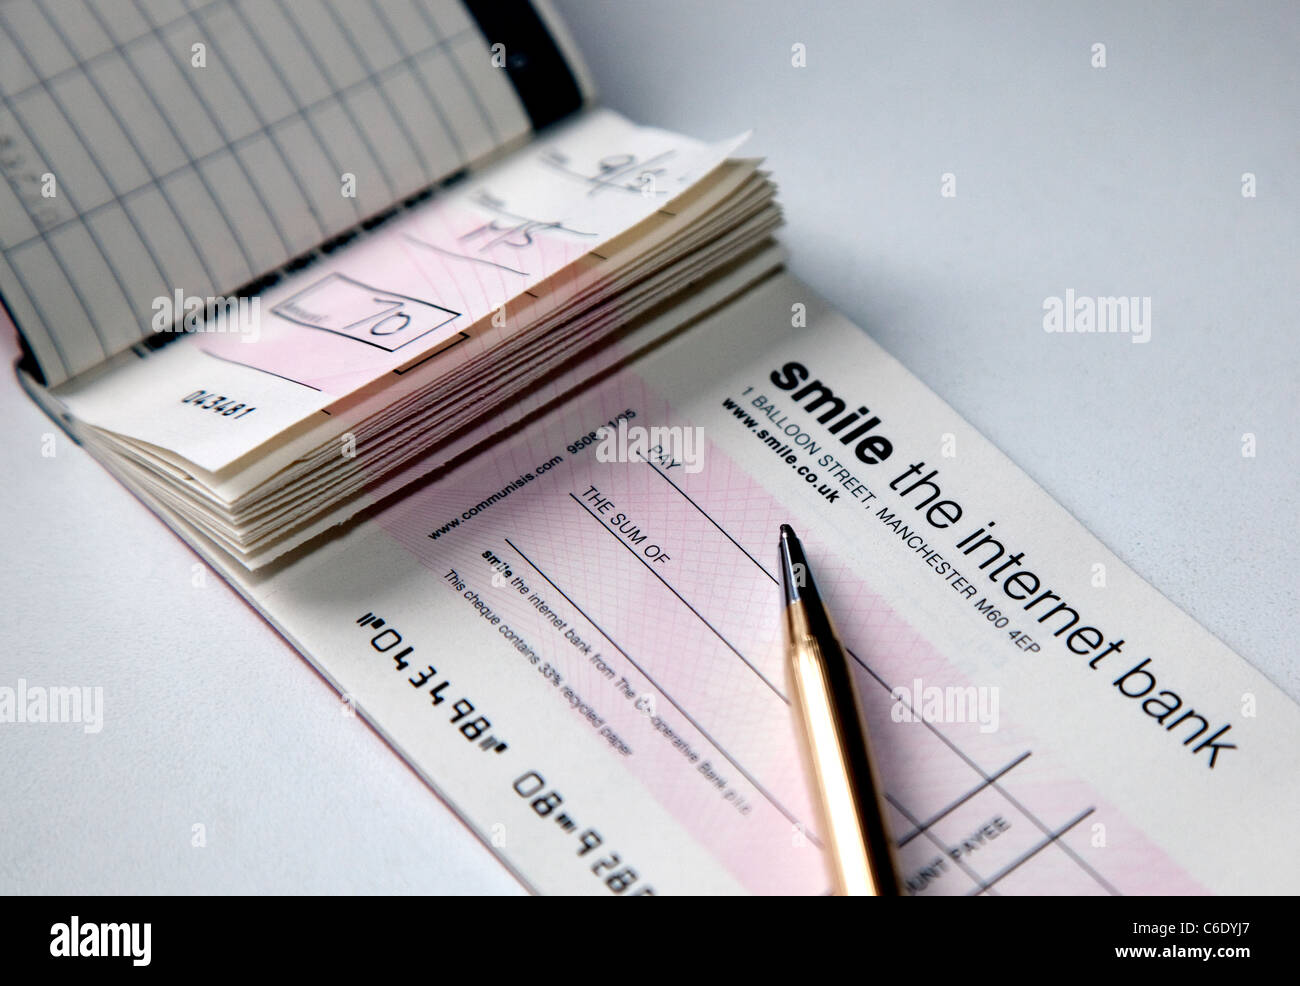 New Cheque Book Request Letter For Current Account - Checkbook, Lettering,  Books